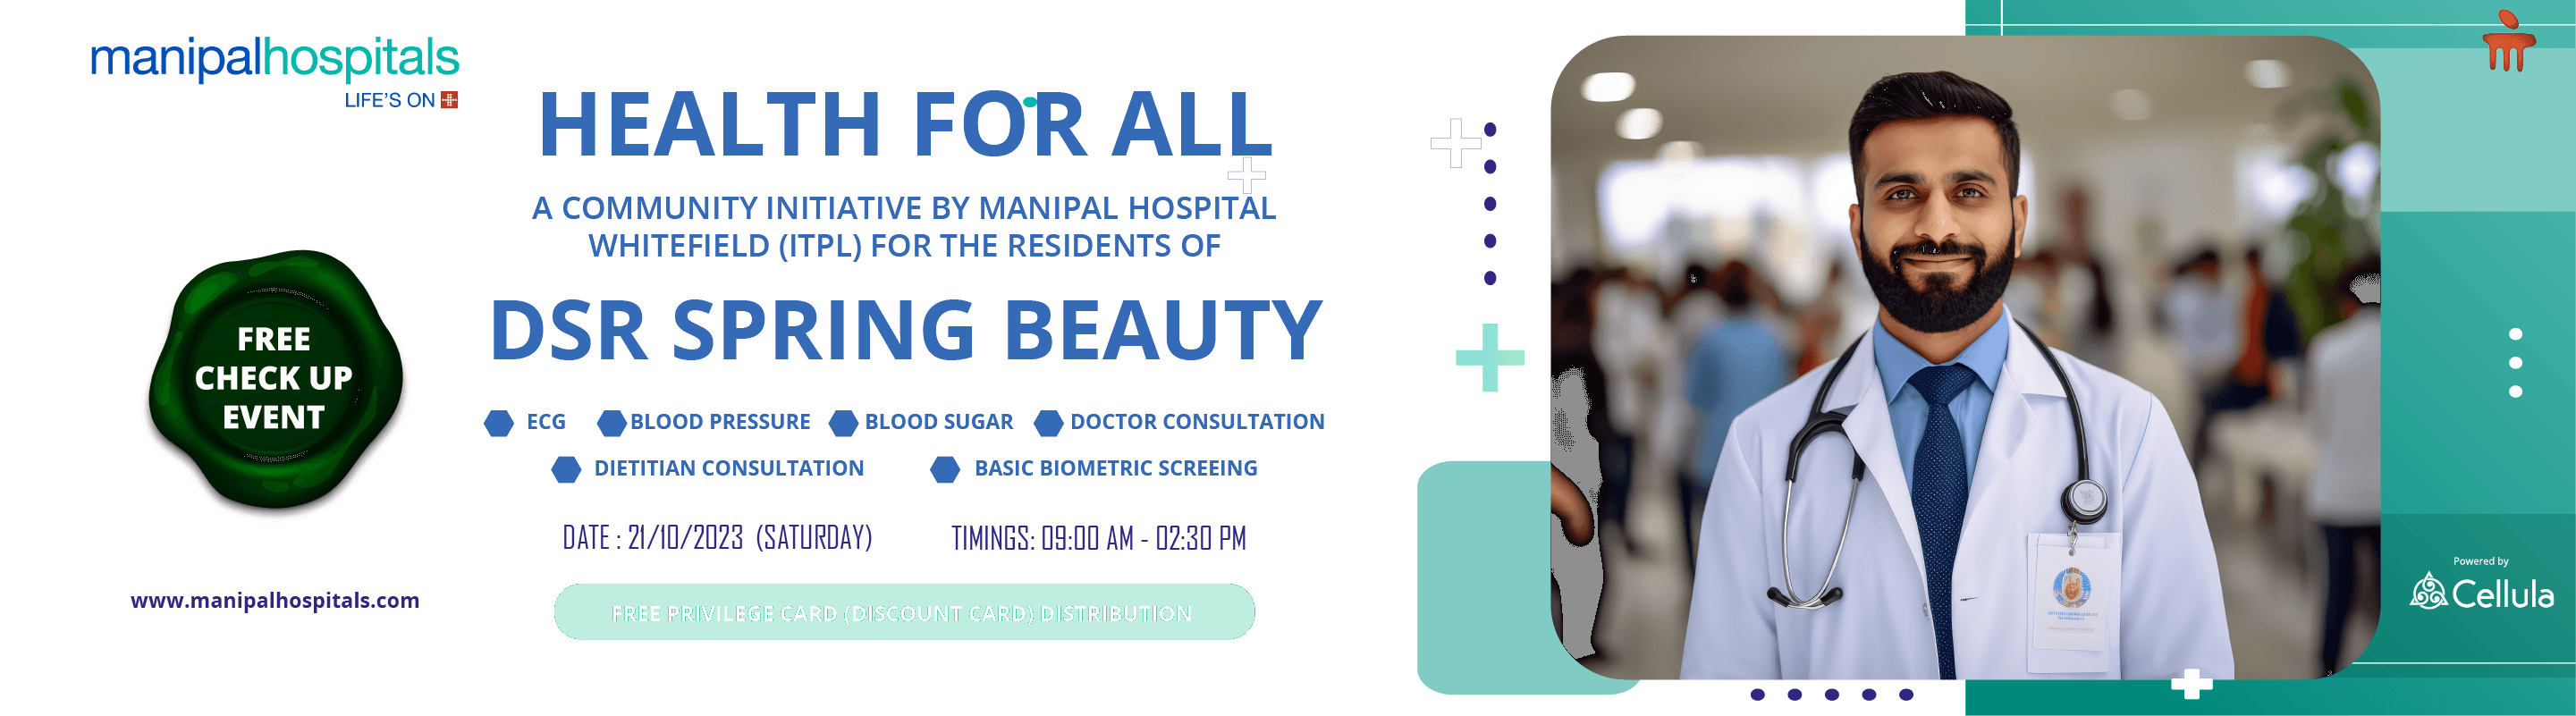 DSR Spring Beauty - Manipal Hospital Whitefield